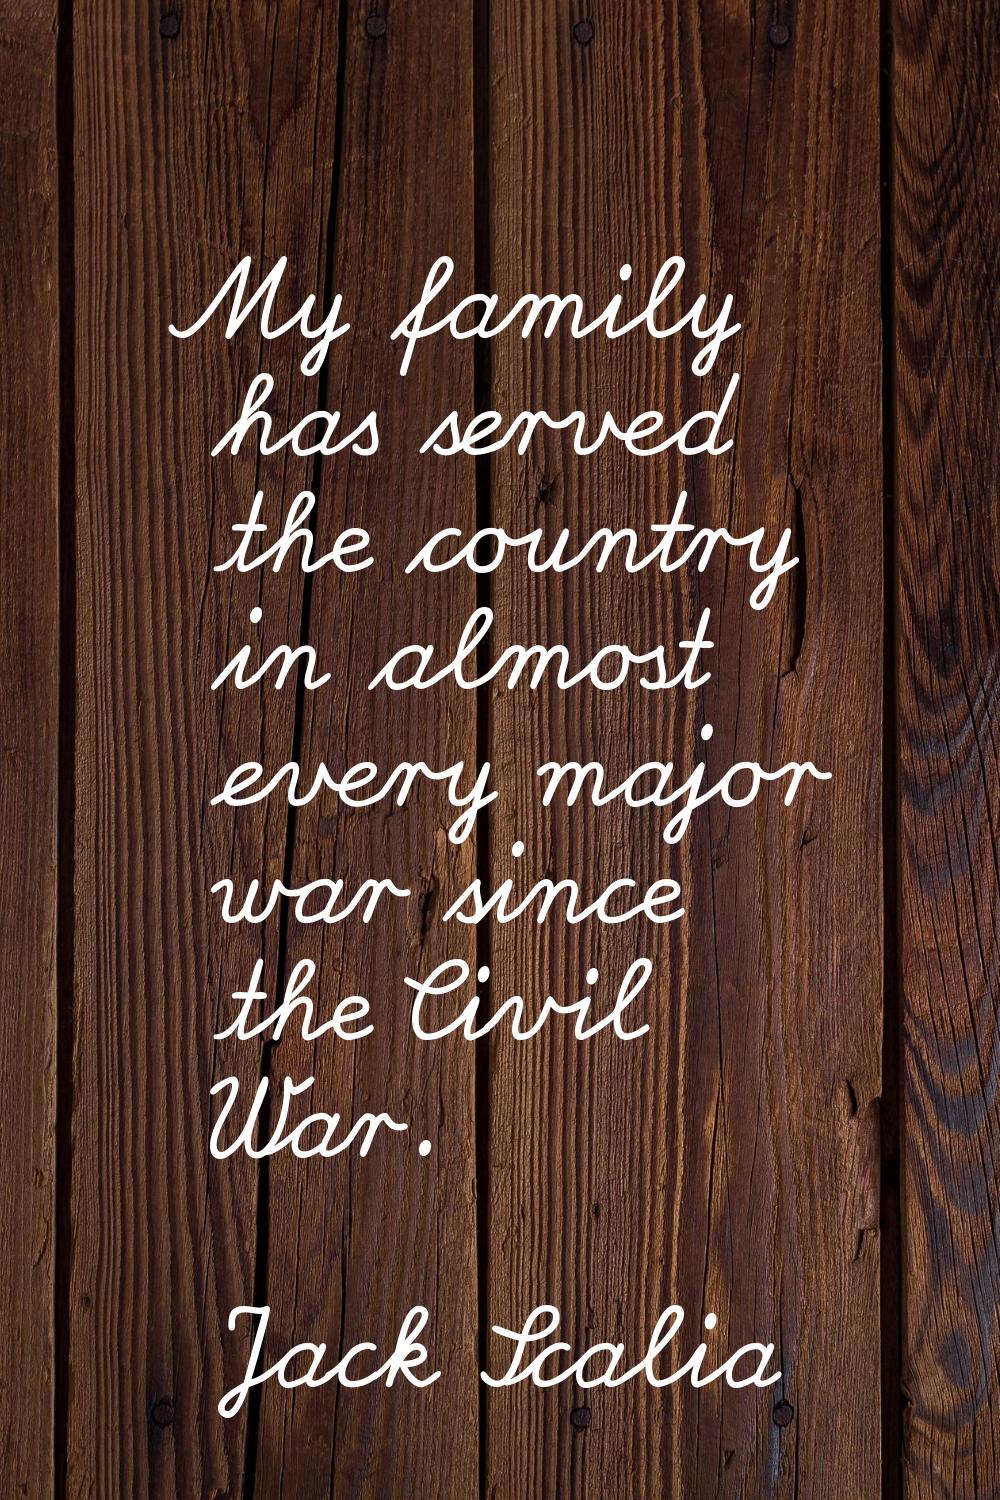 My family has served the country in almost every major war since the Civil War.